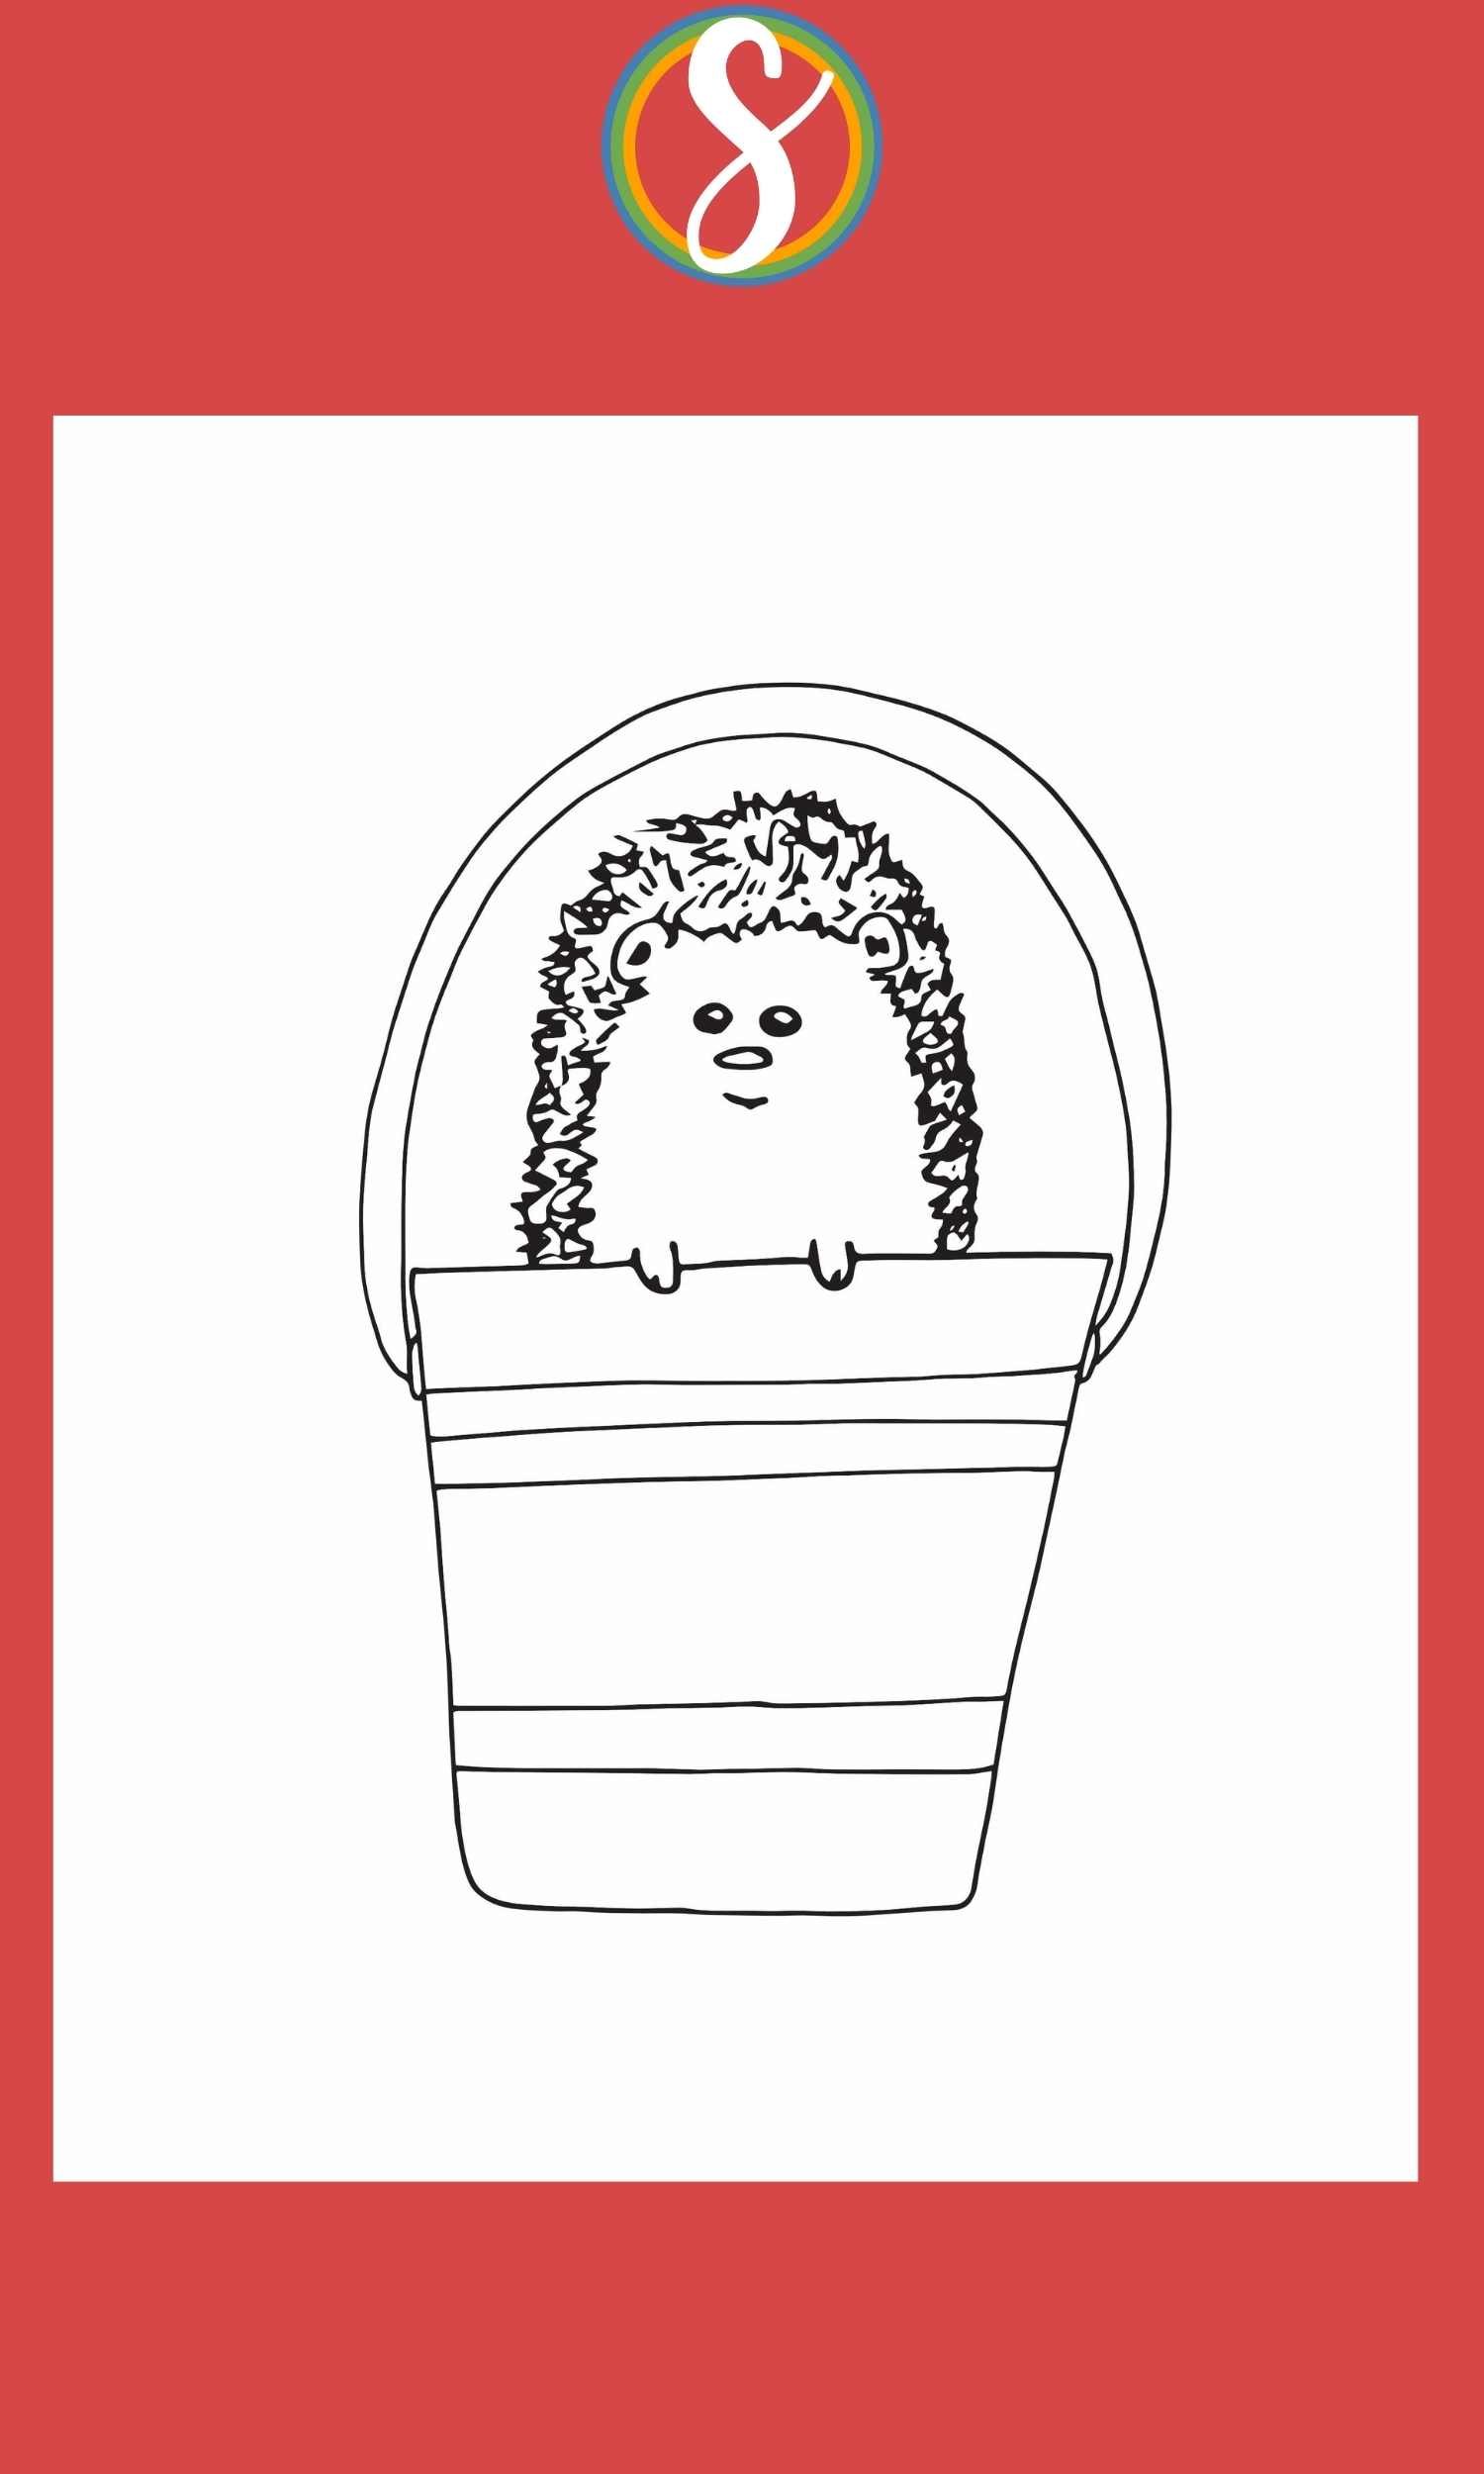 hedgehog coloring page with simple drawing of a hedgehog in a bucket